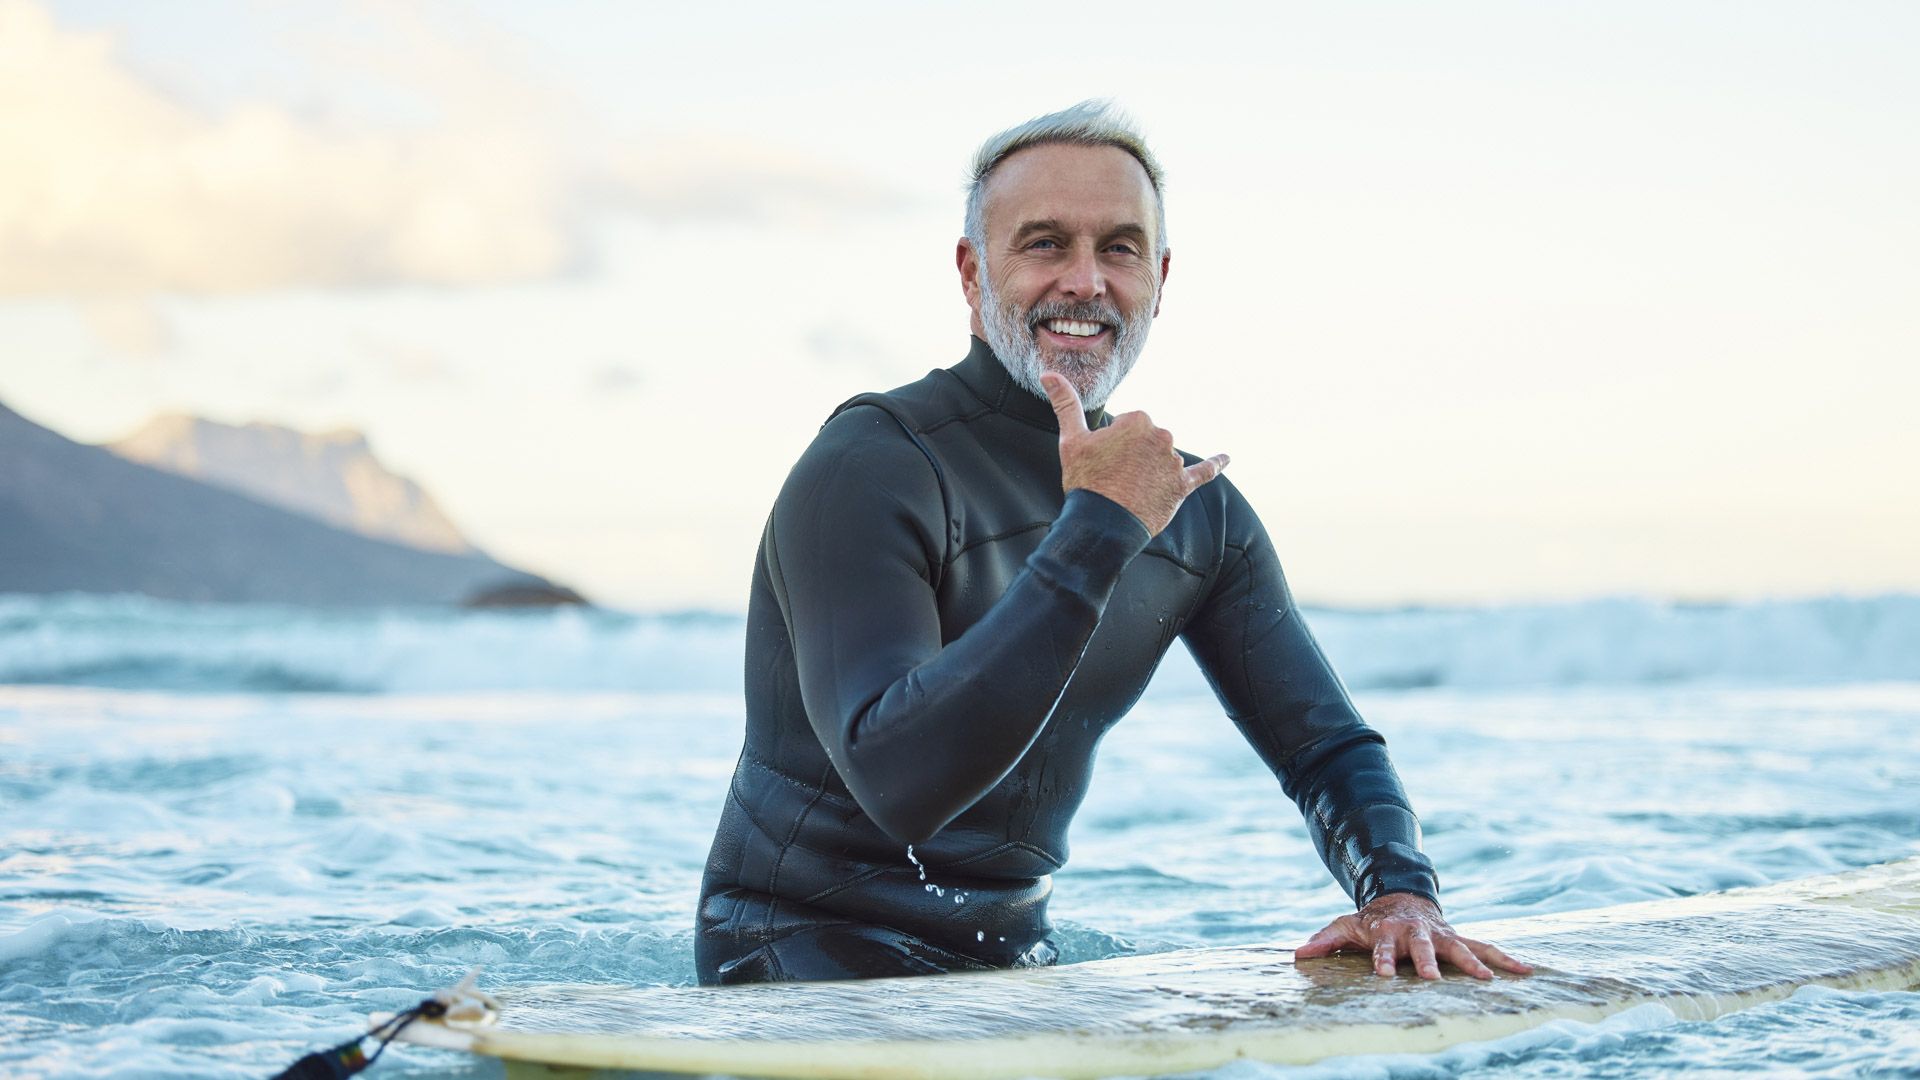 Elderly man smiles while sitting on surfboard in the ocean with his thumb up as he looks into the camera